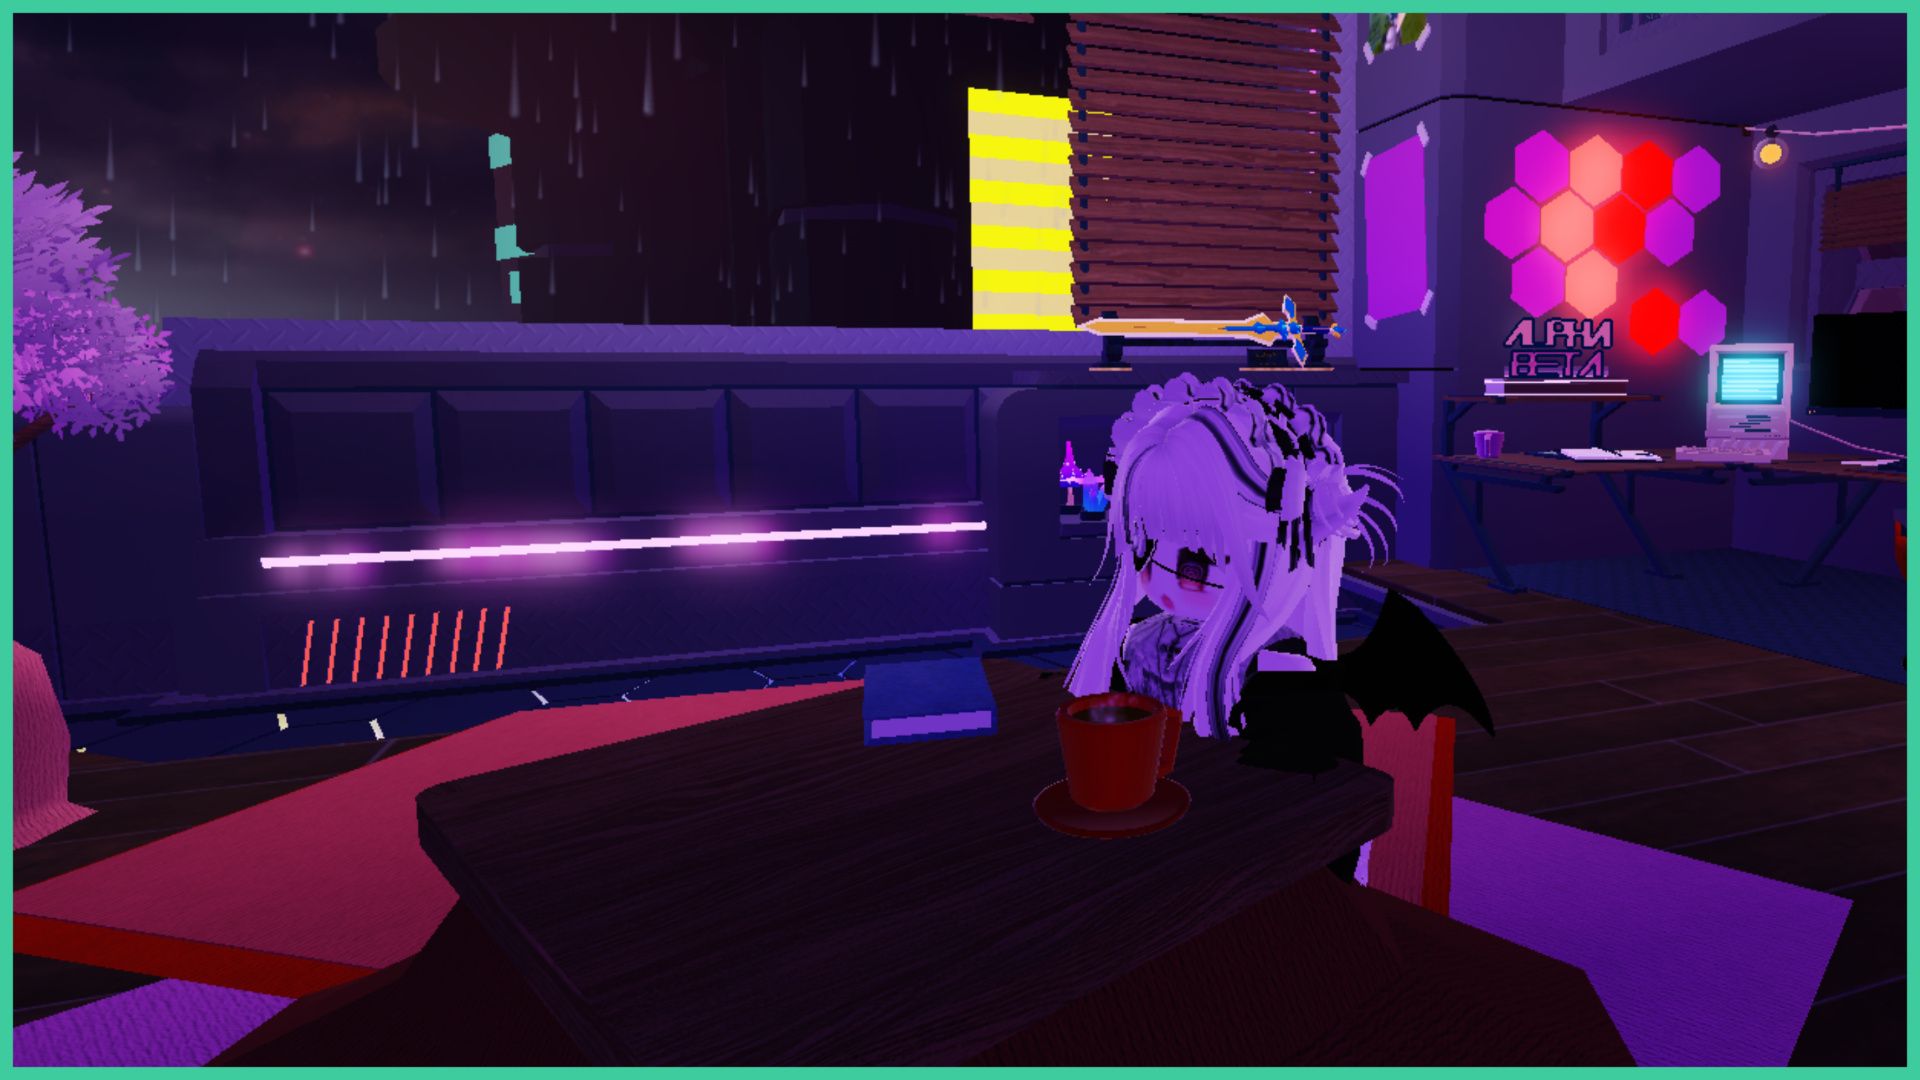 feature image for our swordburst 3 skills tier list, the image features a screenshot of a roblox player sat at a table with a hot beverage in a mug, and a closed book, there is rain falling outside the window. They are inside a neon-lit apartment on a high floor, as you can see tall buildings in the distance